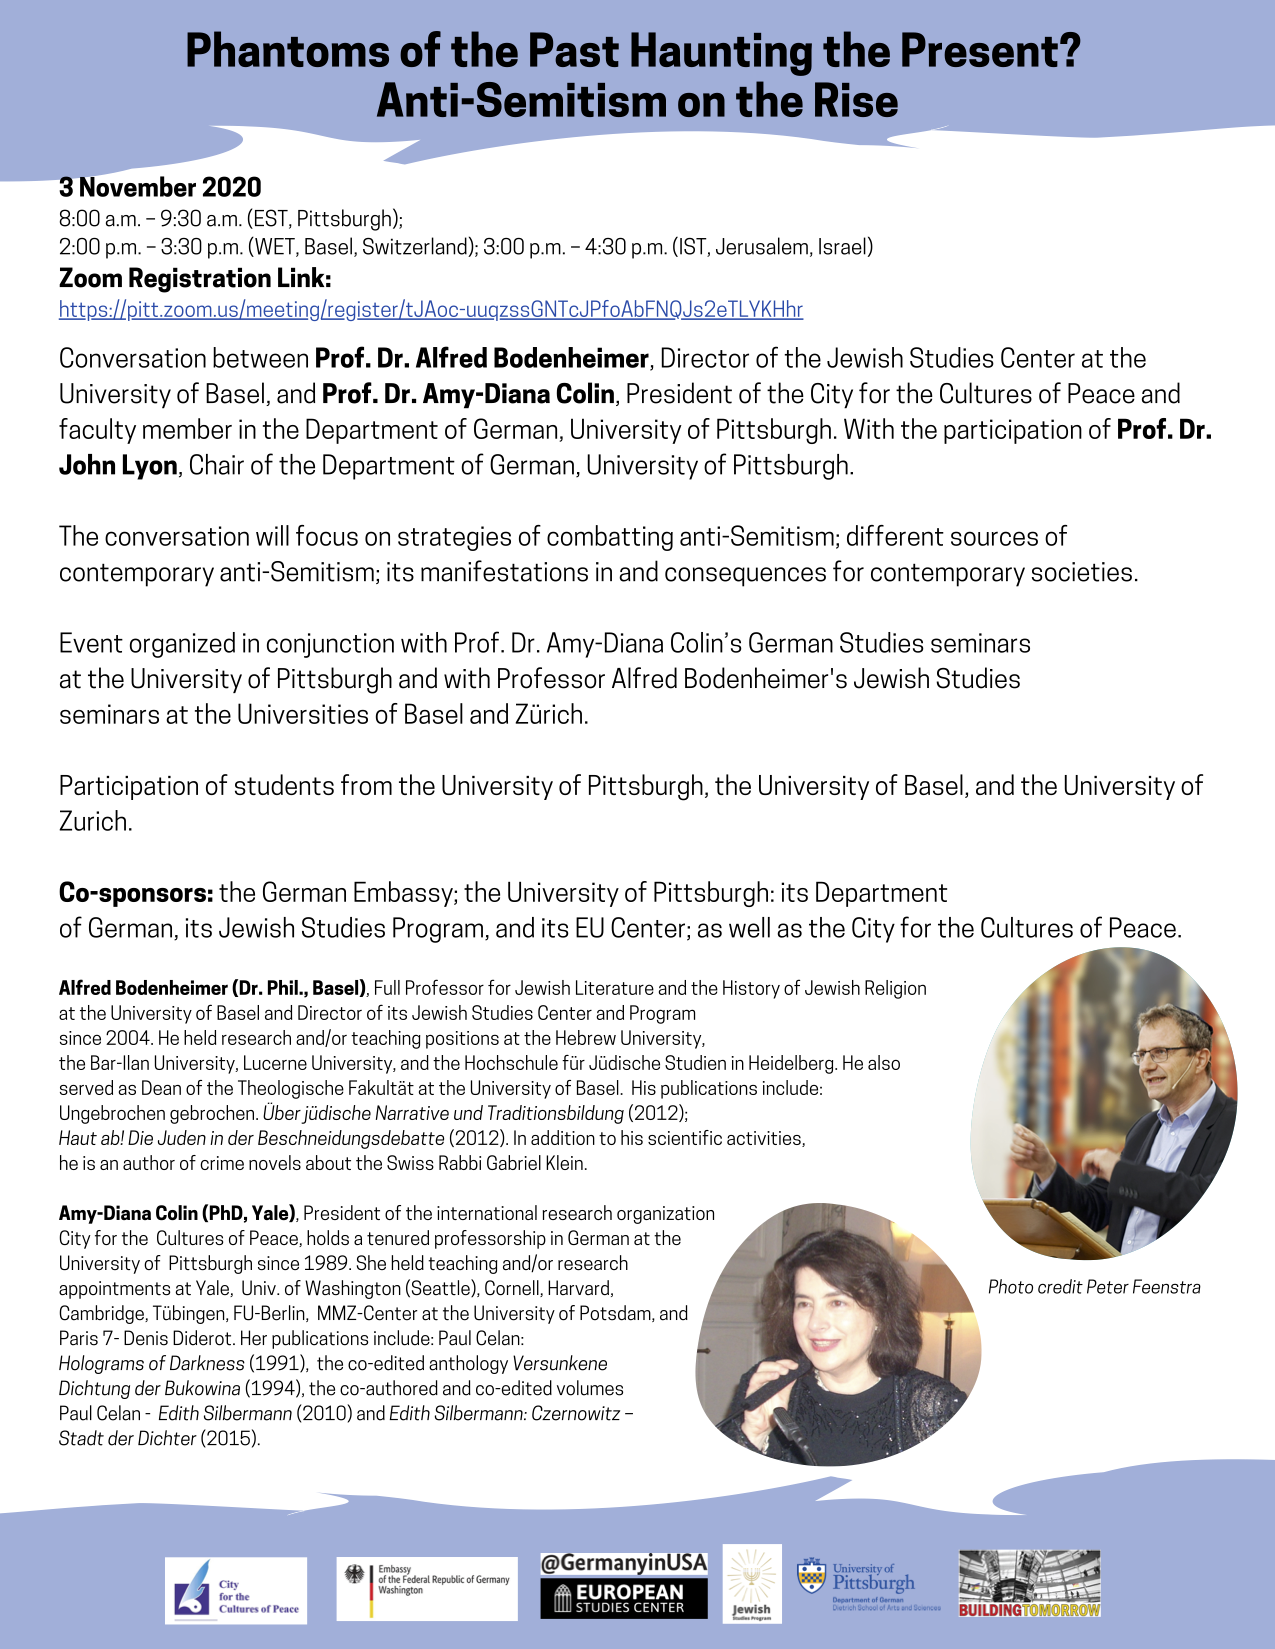 This flyer describes the Conversation between Prof. Dr. Alfred Bodenheimer, Director of the Jewish Studies Center at the University of Basel, and Prof. Dr. Amy-Diana Colin, President of the City for the Cultures of Peace and faculty member in the Department of German, University of Pittsburgh. With the participation of Prof. Dr. John Lyon, Chair of the Department of German, University of Pittsburgh. The flyer is white and blue and has photos of the two presenters. Please click on the interactive pdf link to read the text on this flyer.